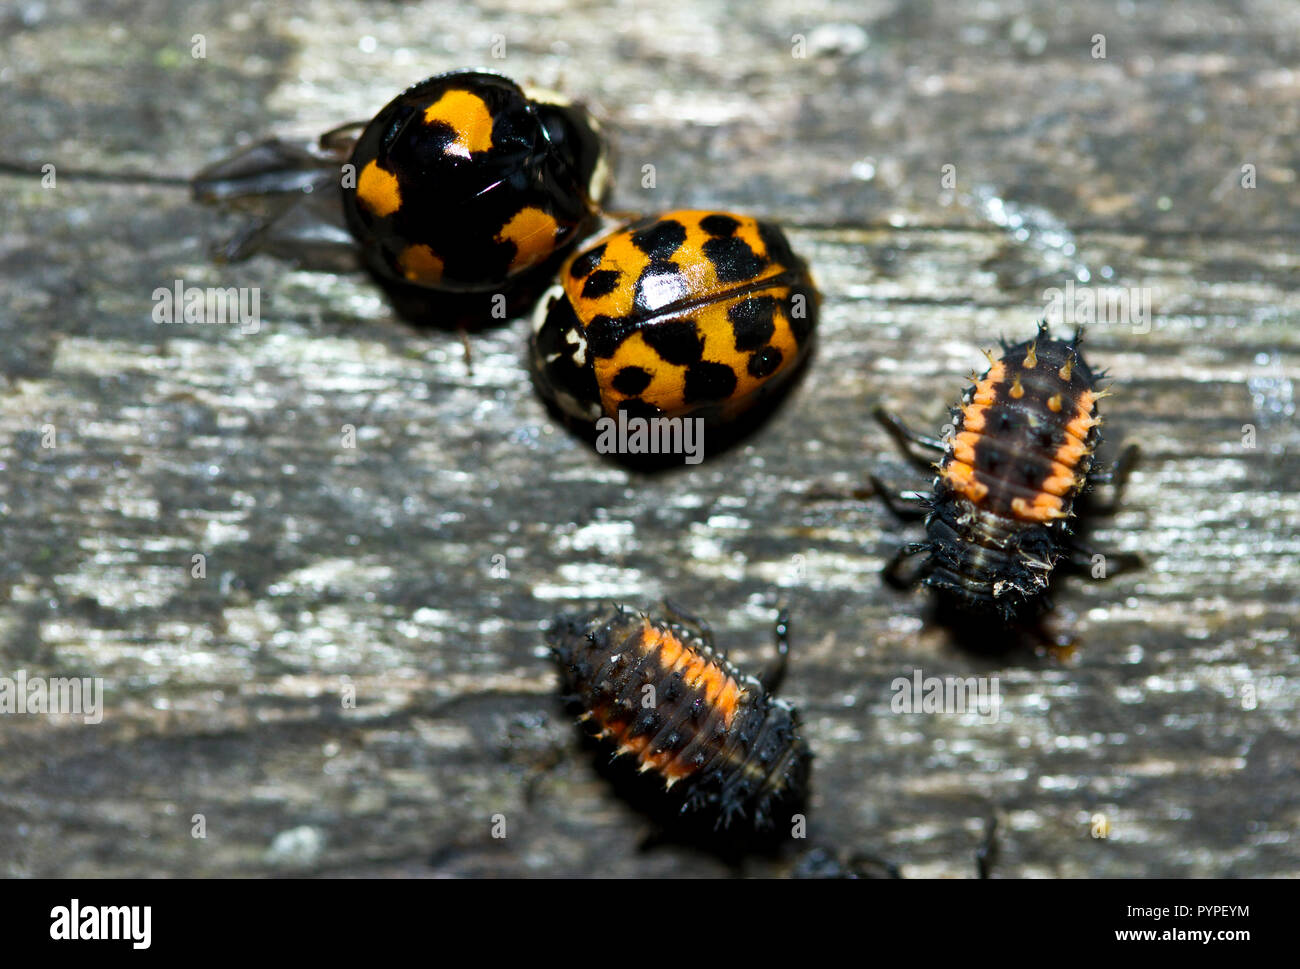 The invasion Harlequin Ladybug has arrived in huge numbers this autumn and threaten idogenous ladybird species as it is both predatory on them Stock Photo